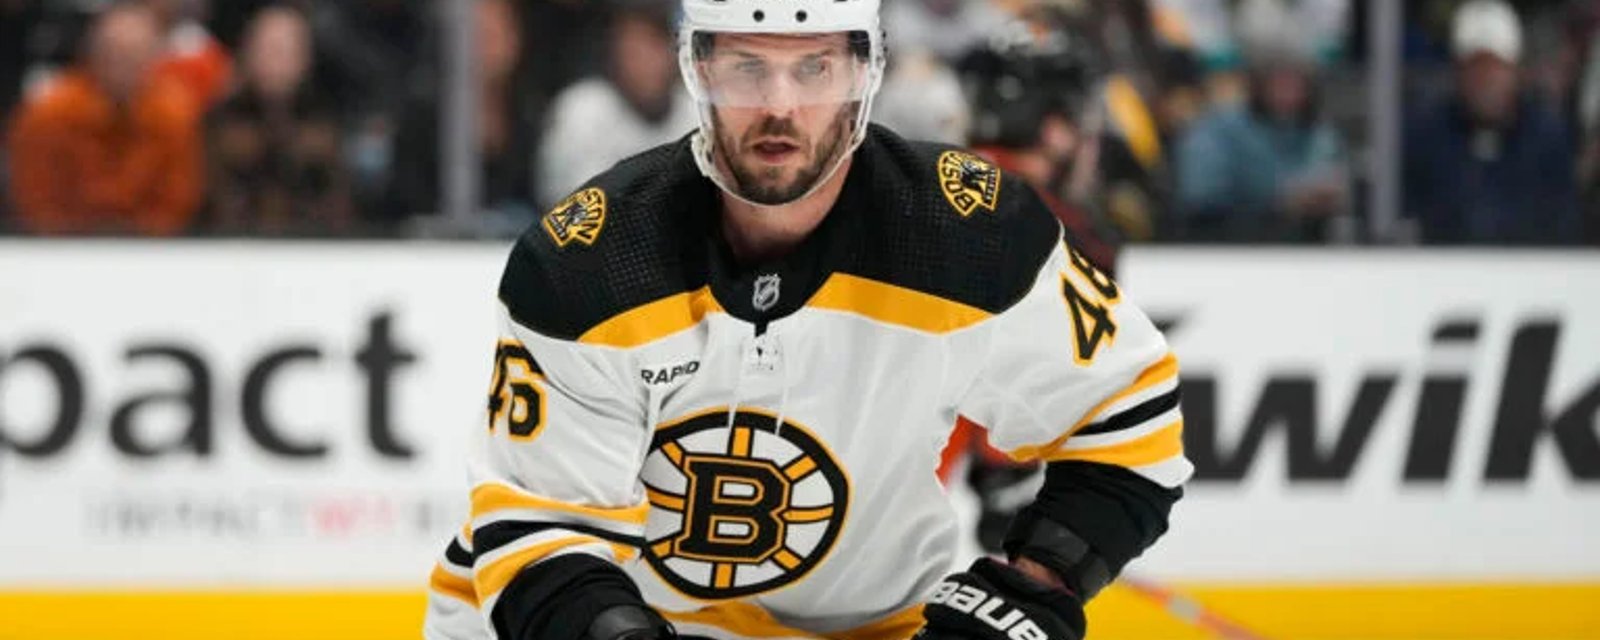 Report: Official announcement from David Krejci imminent 